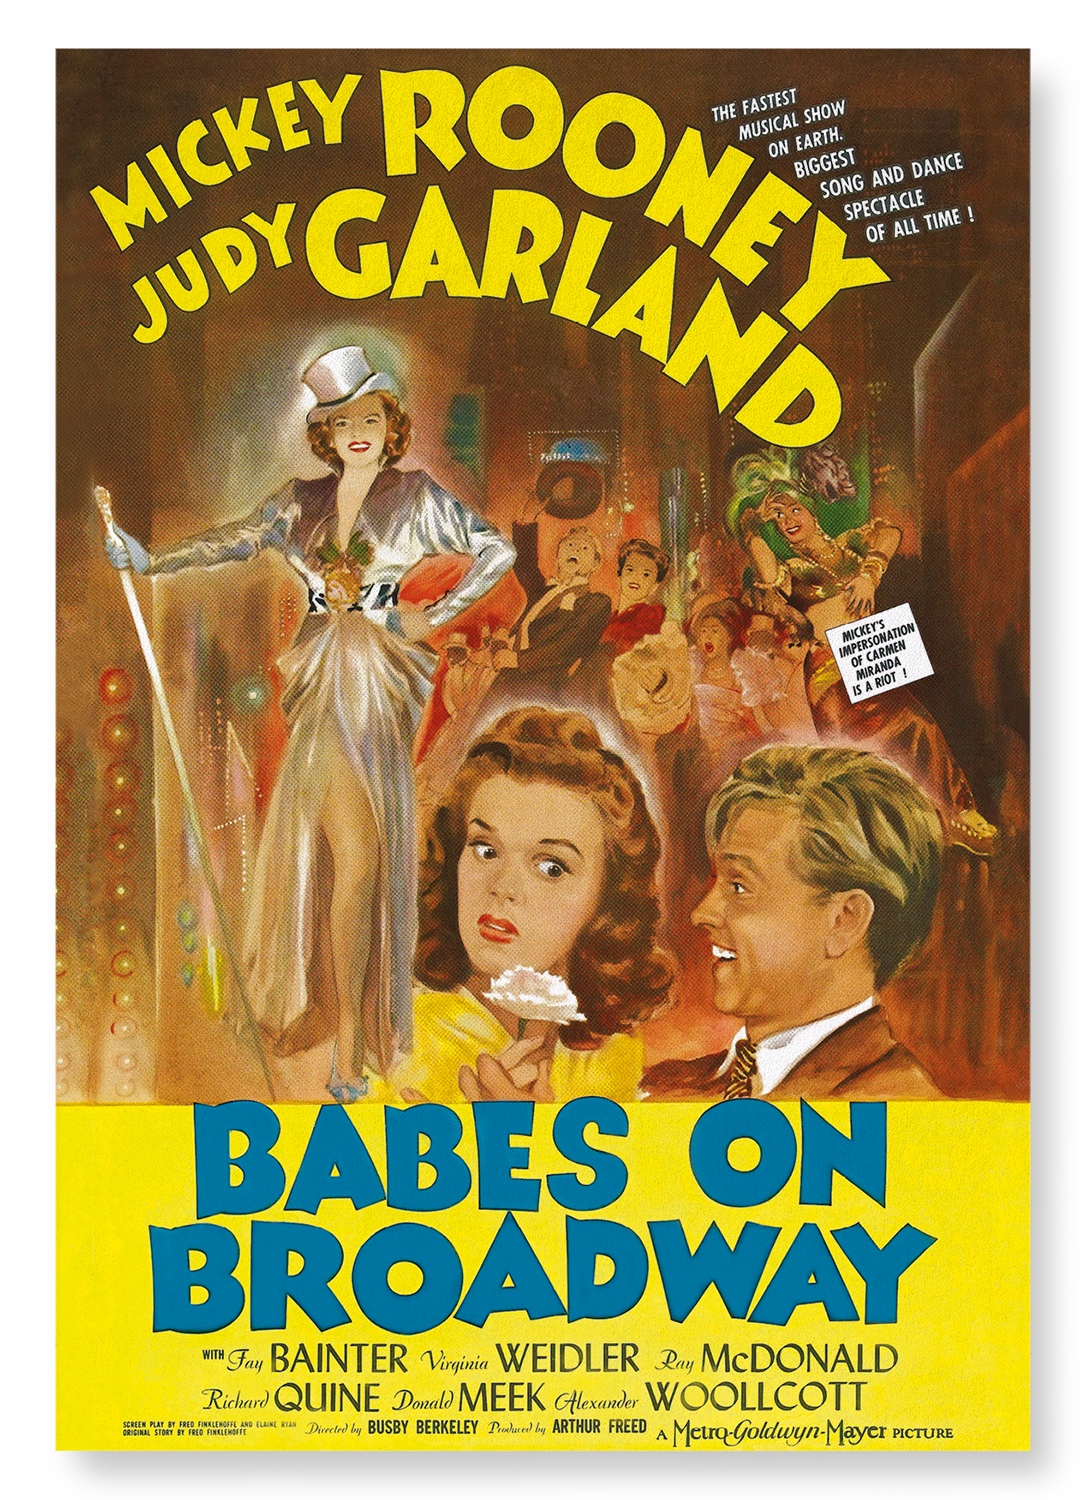 BABES ON BROADWAY (1941)